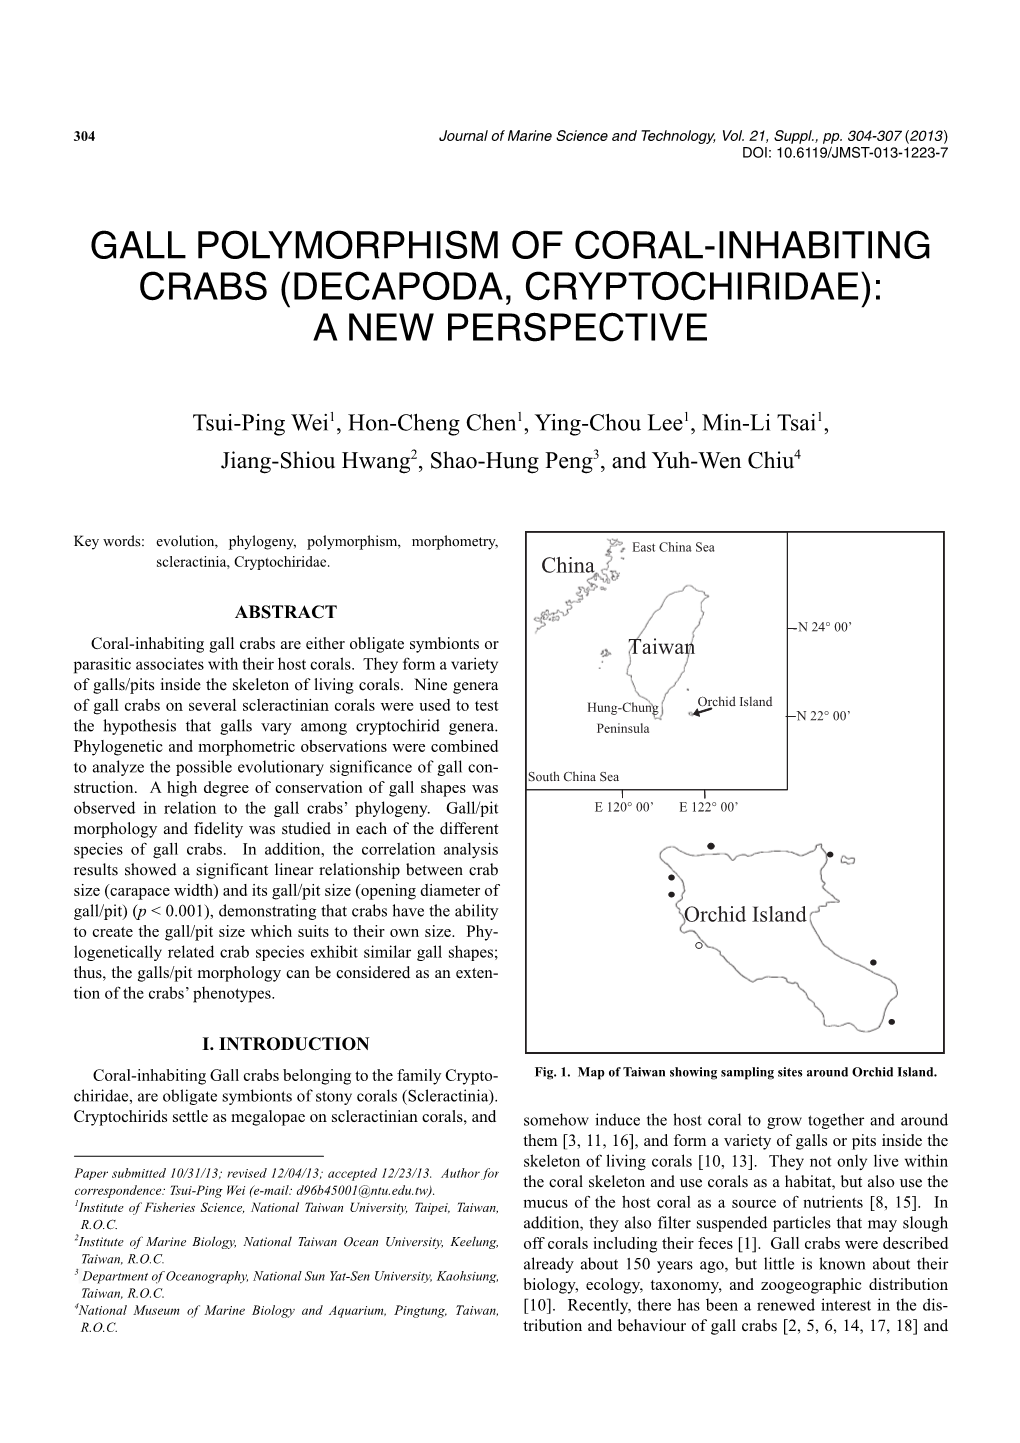 Gall Polymorphism of Coral-Inhabiting Crabs (Decapoda, Cryptochiridae): a New Perspective